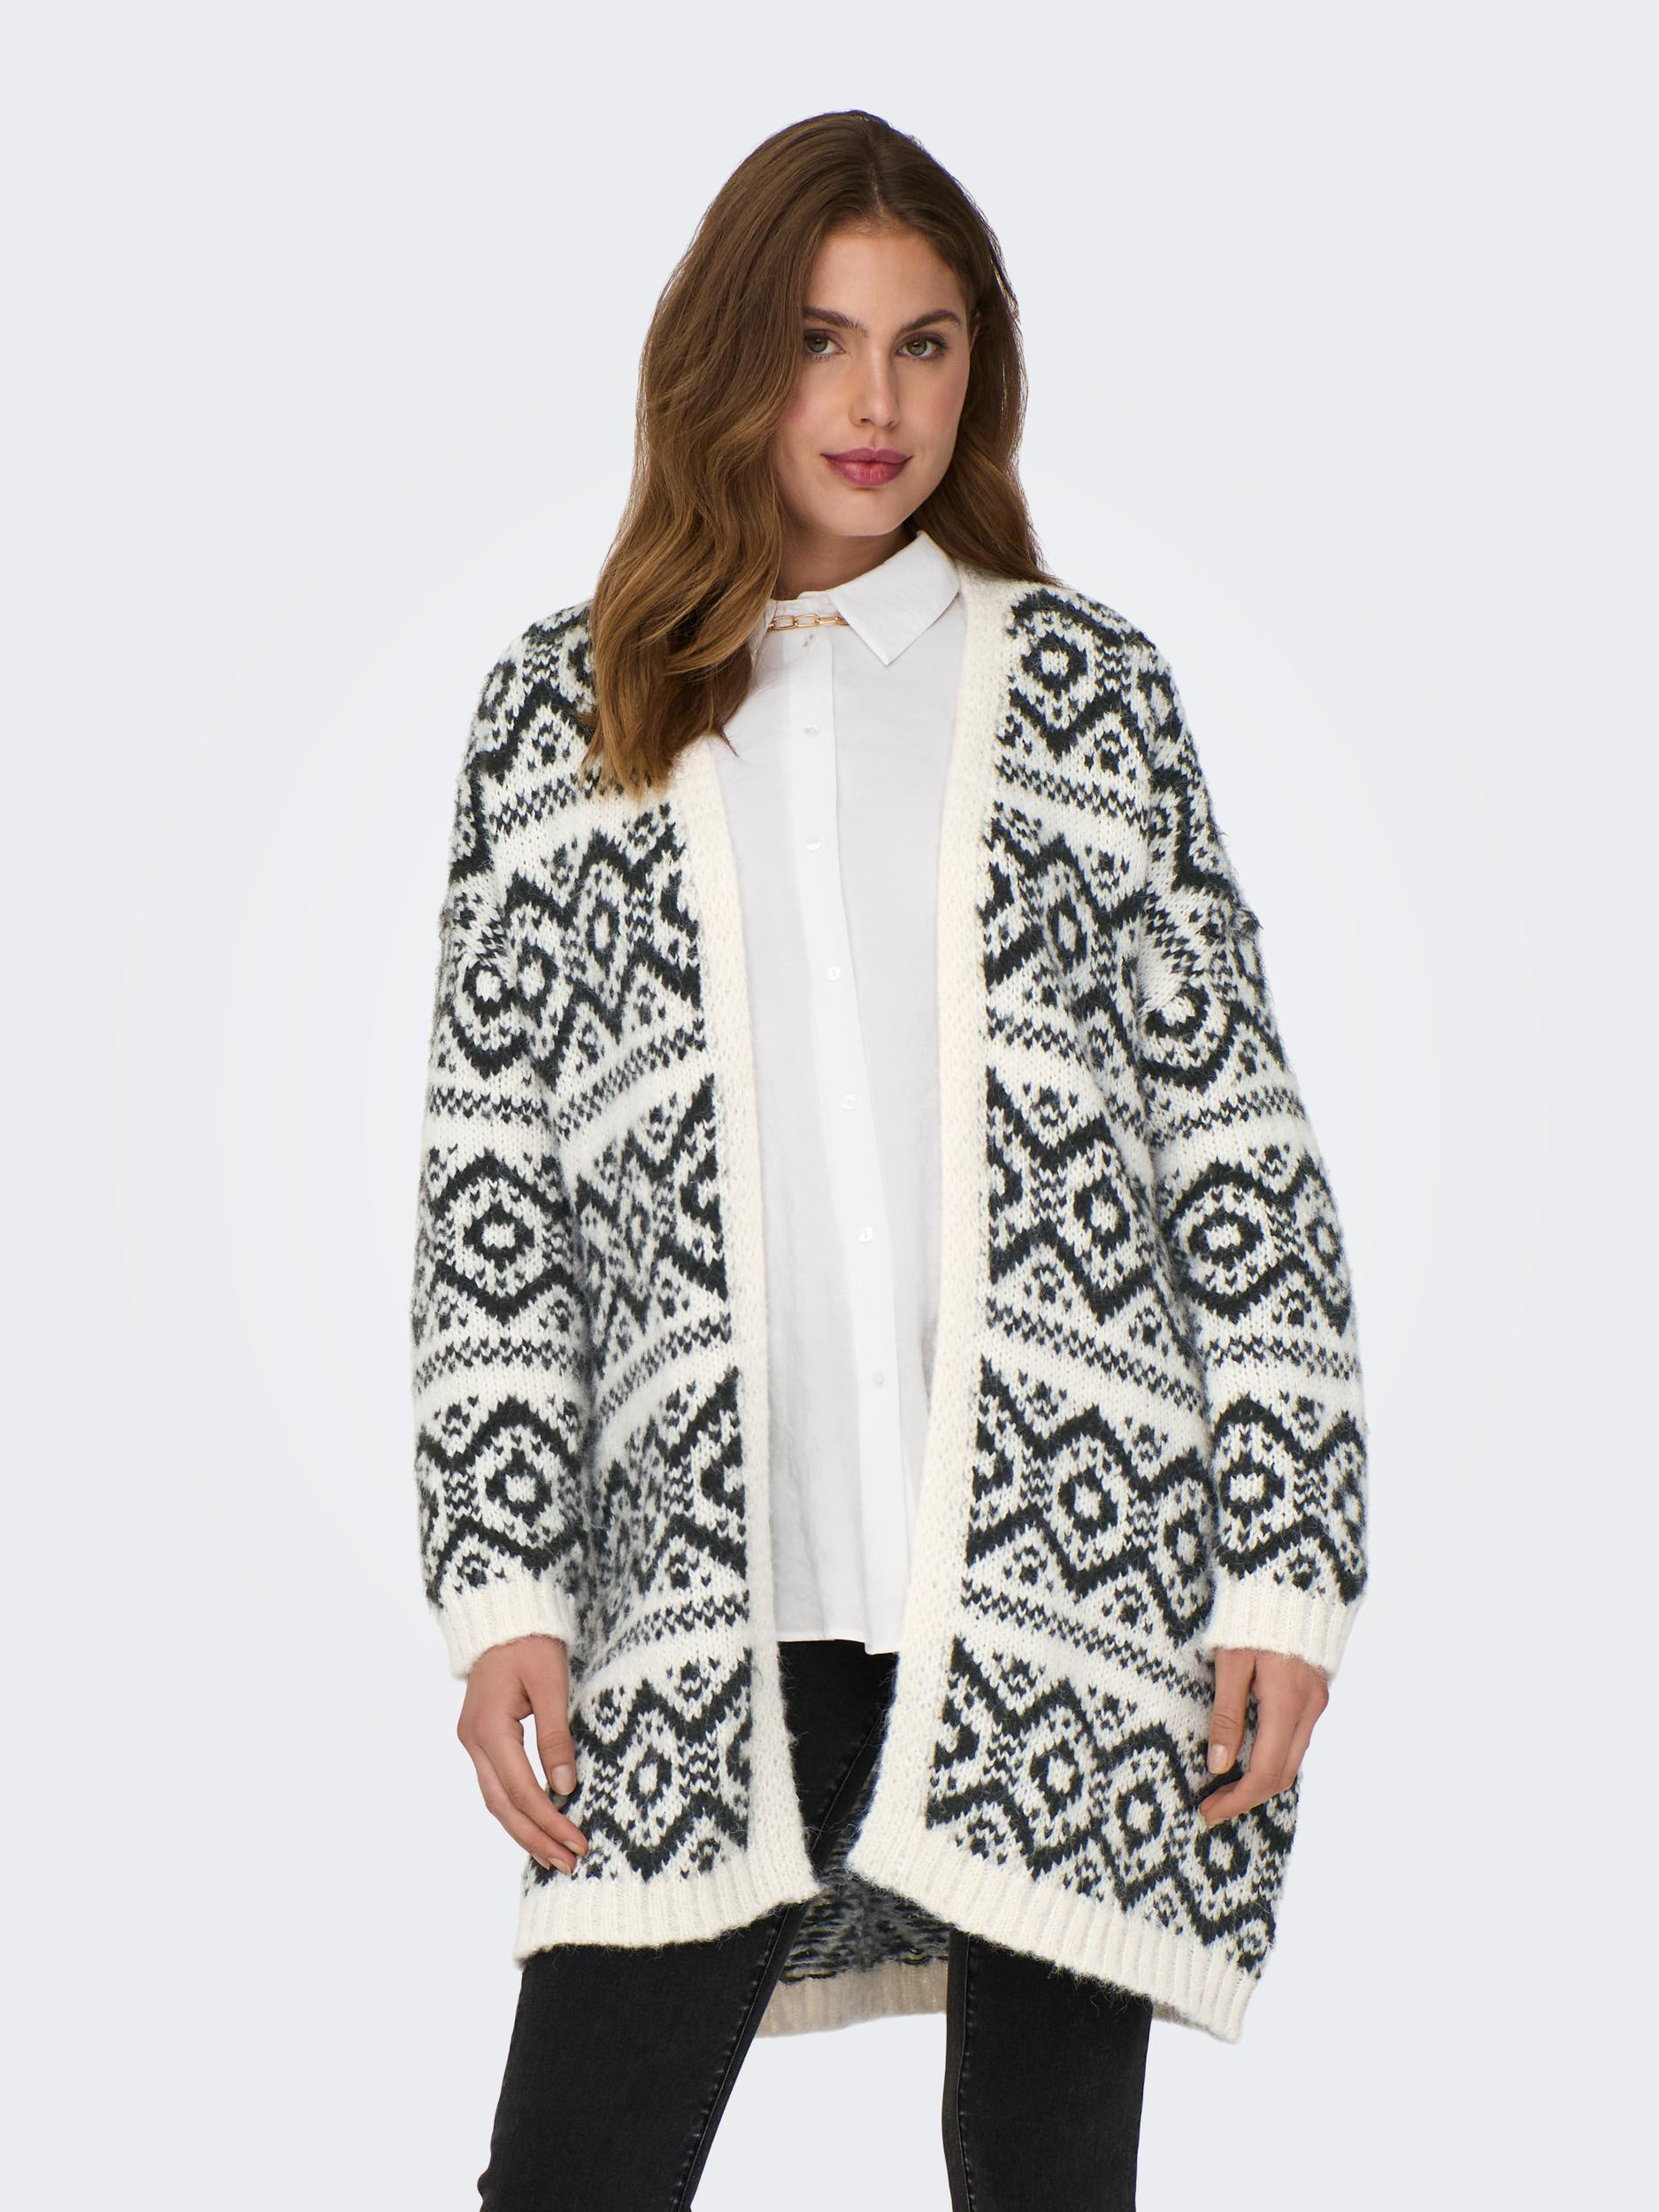 Only - Long cardigan with print, Grey, large image number 5